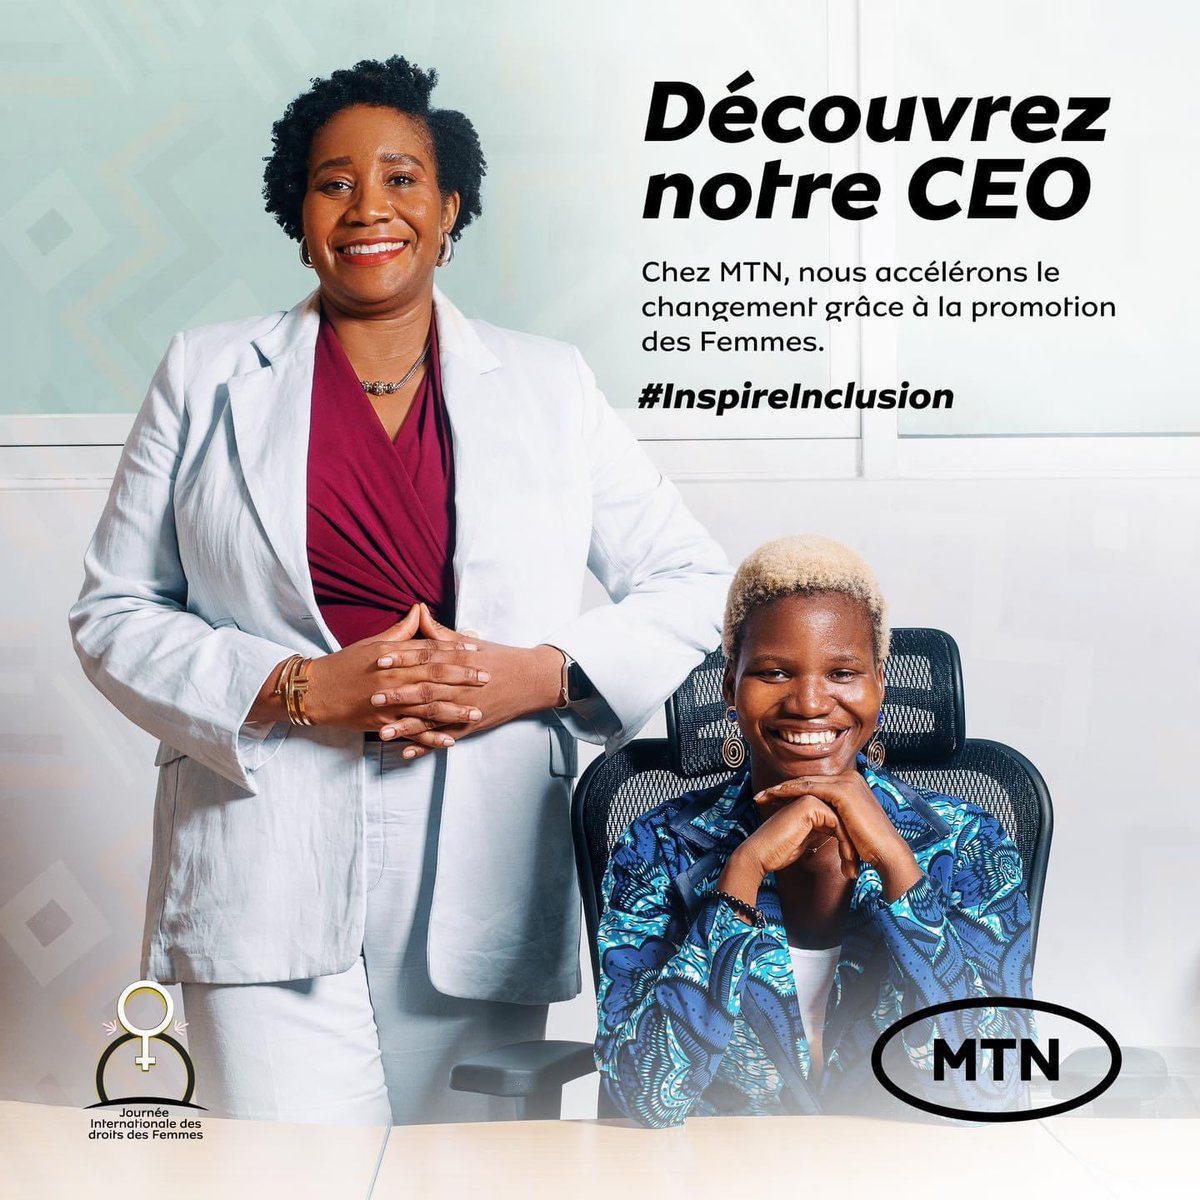 Looking forward to March 12 when Nadine will take over the CEO role😅 The “CEO of the day” initiative showcases women talent, and inspires future generations. I can’t wait to see Nadine in action. You can still join us. Please do! #inspireinclusion #ceooftheday #doinggoodtogether